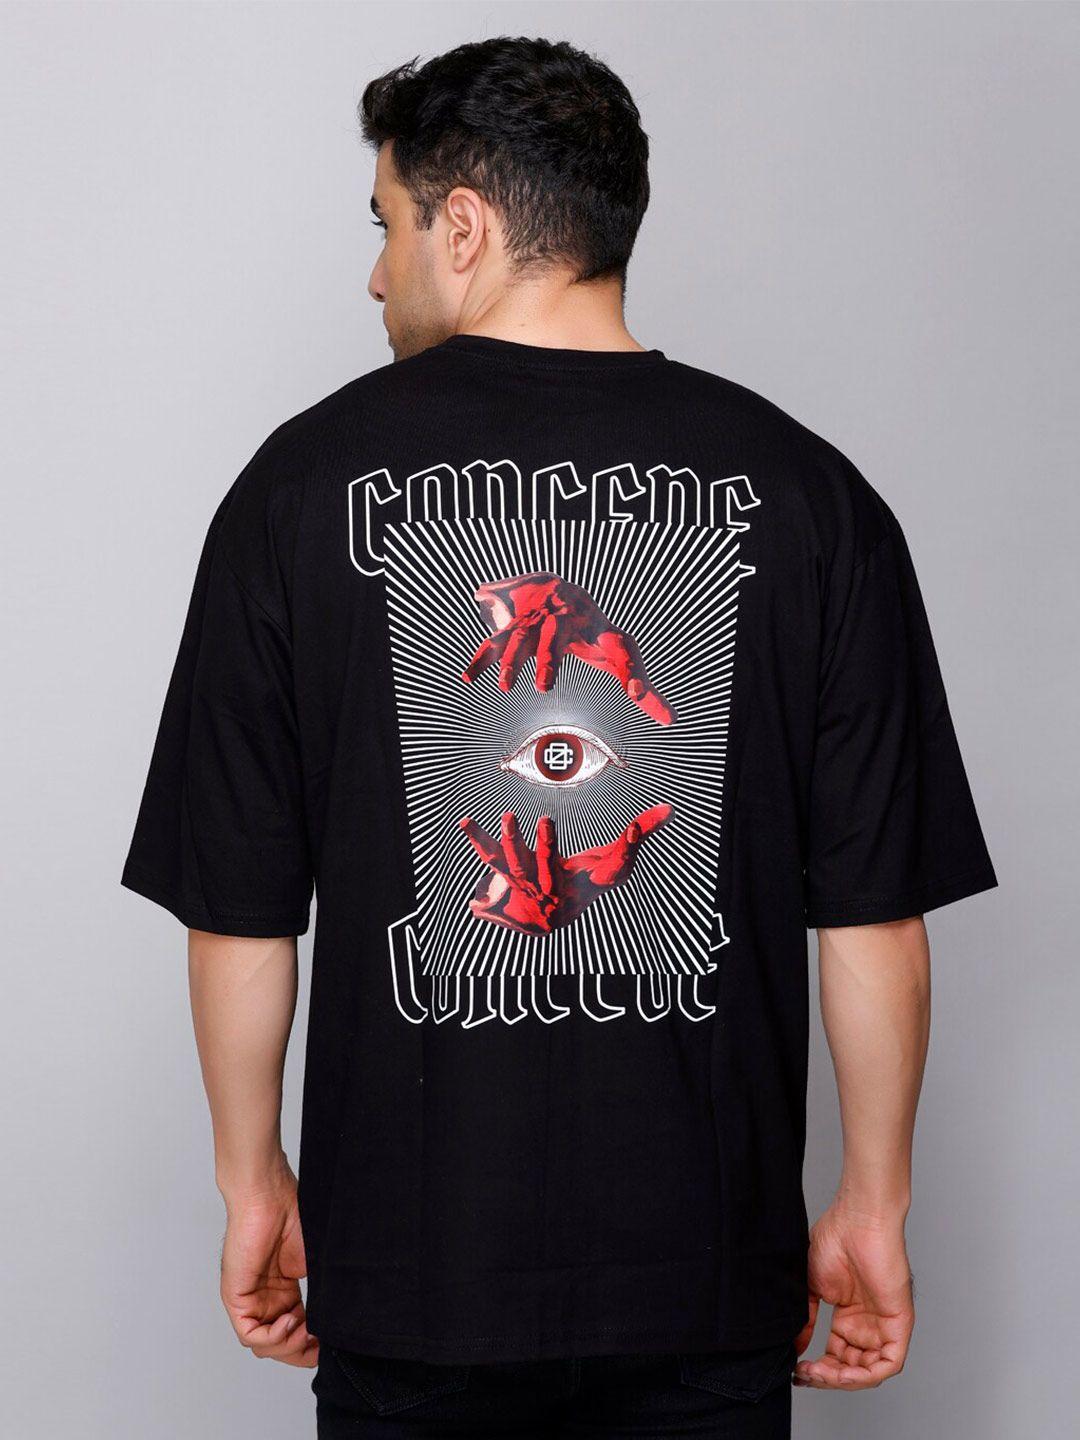 concede graphic printed oversized pure cotton t-shirt